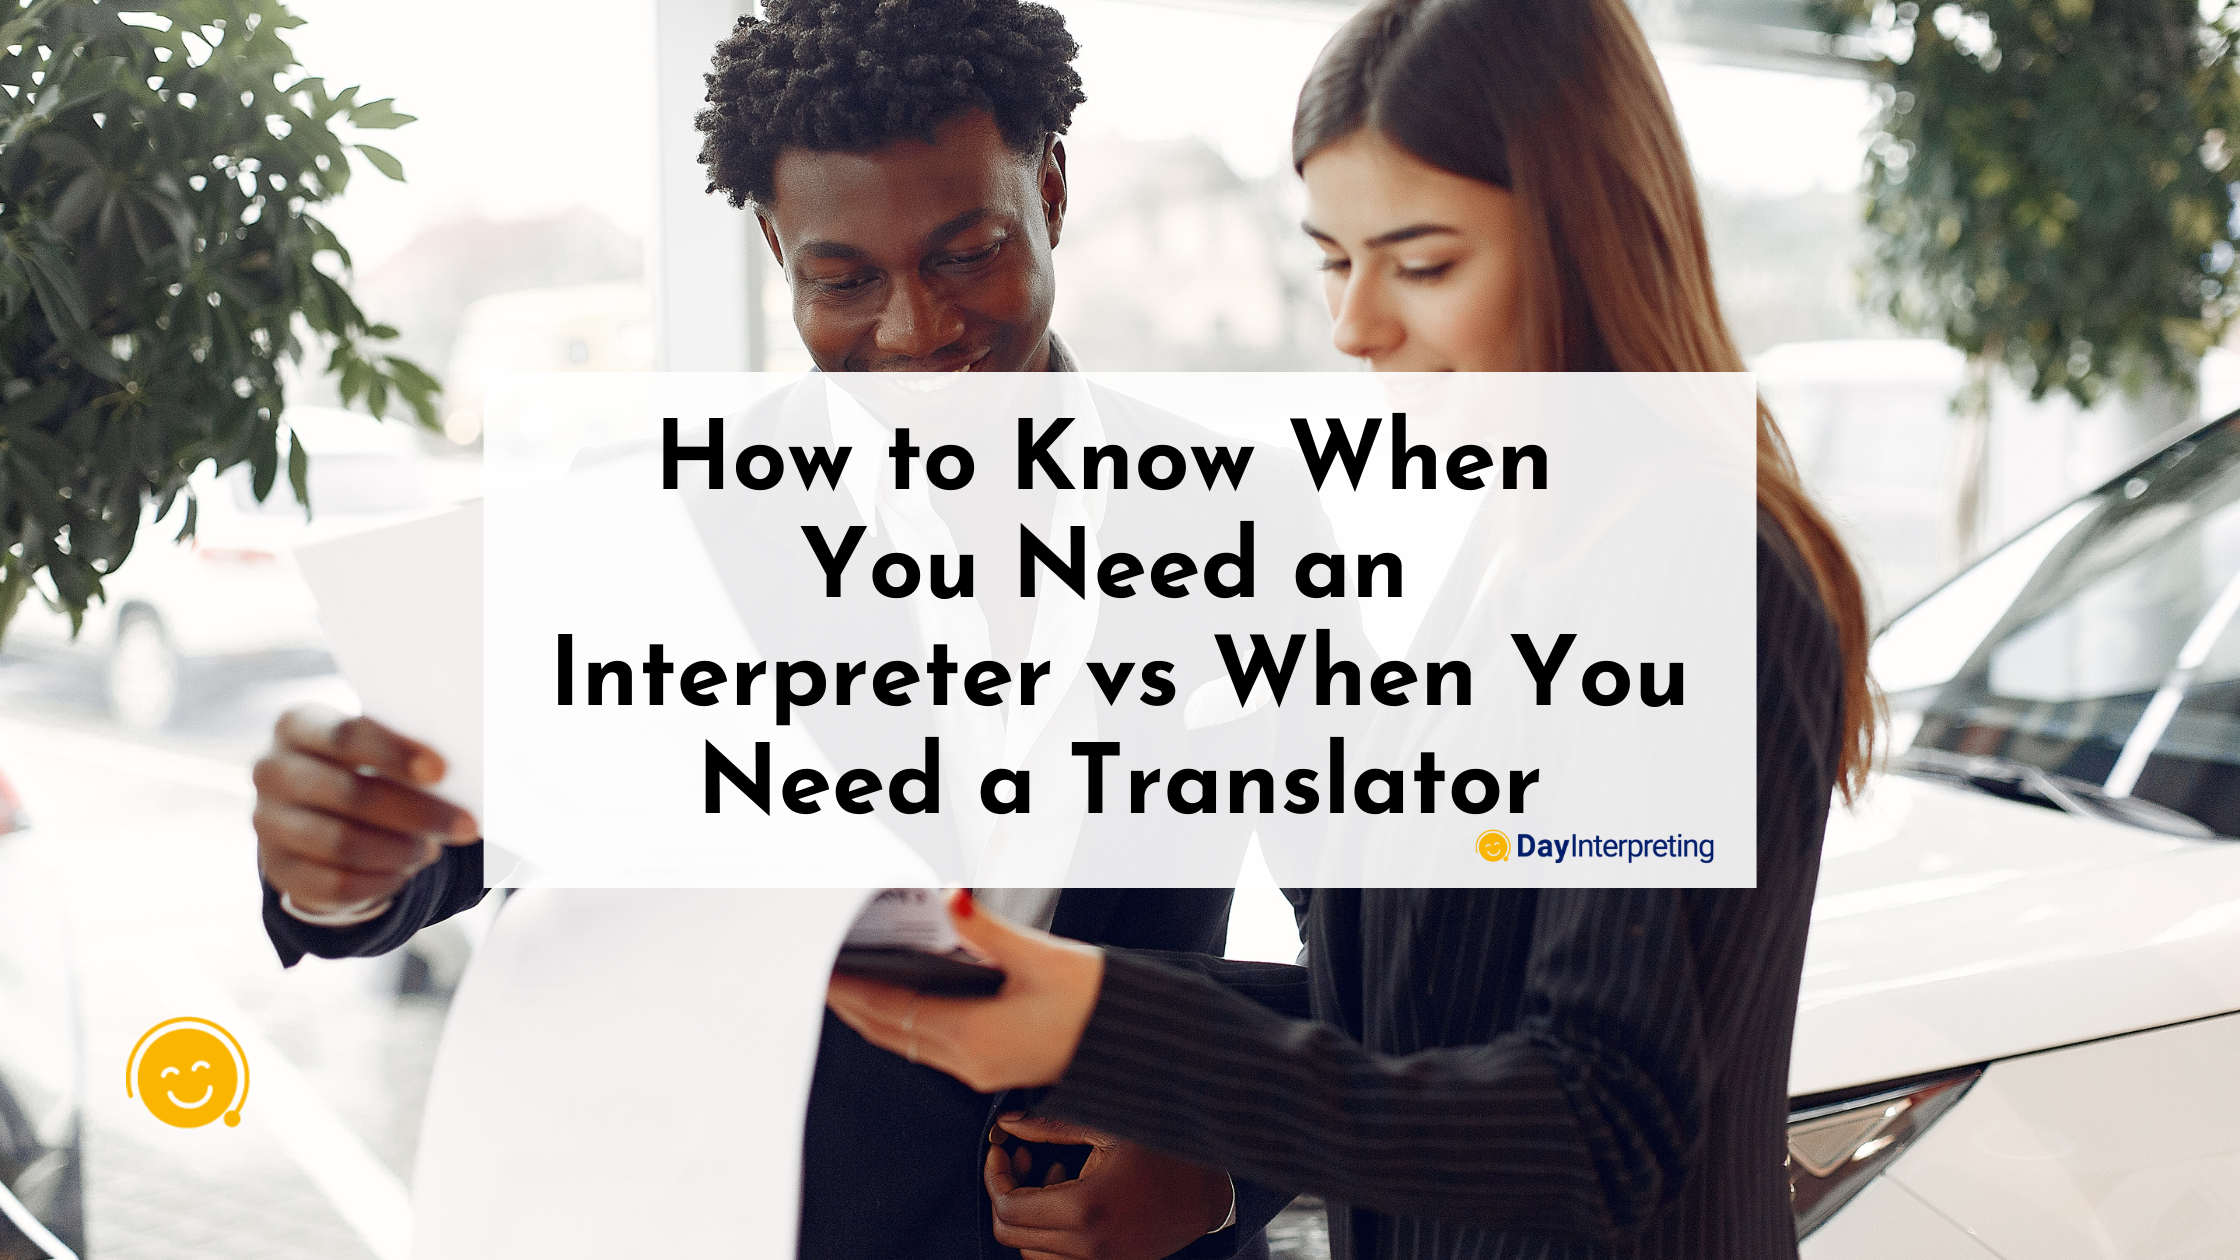 How to Know When You Need an Interpreter vs When You Need a Translator